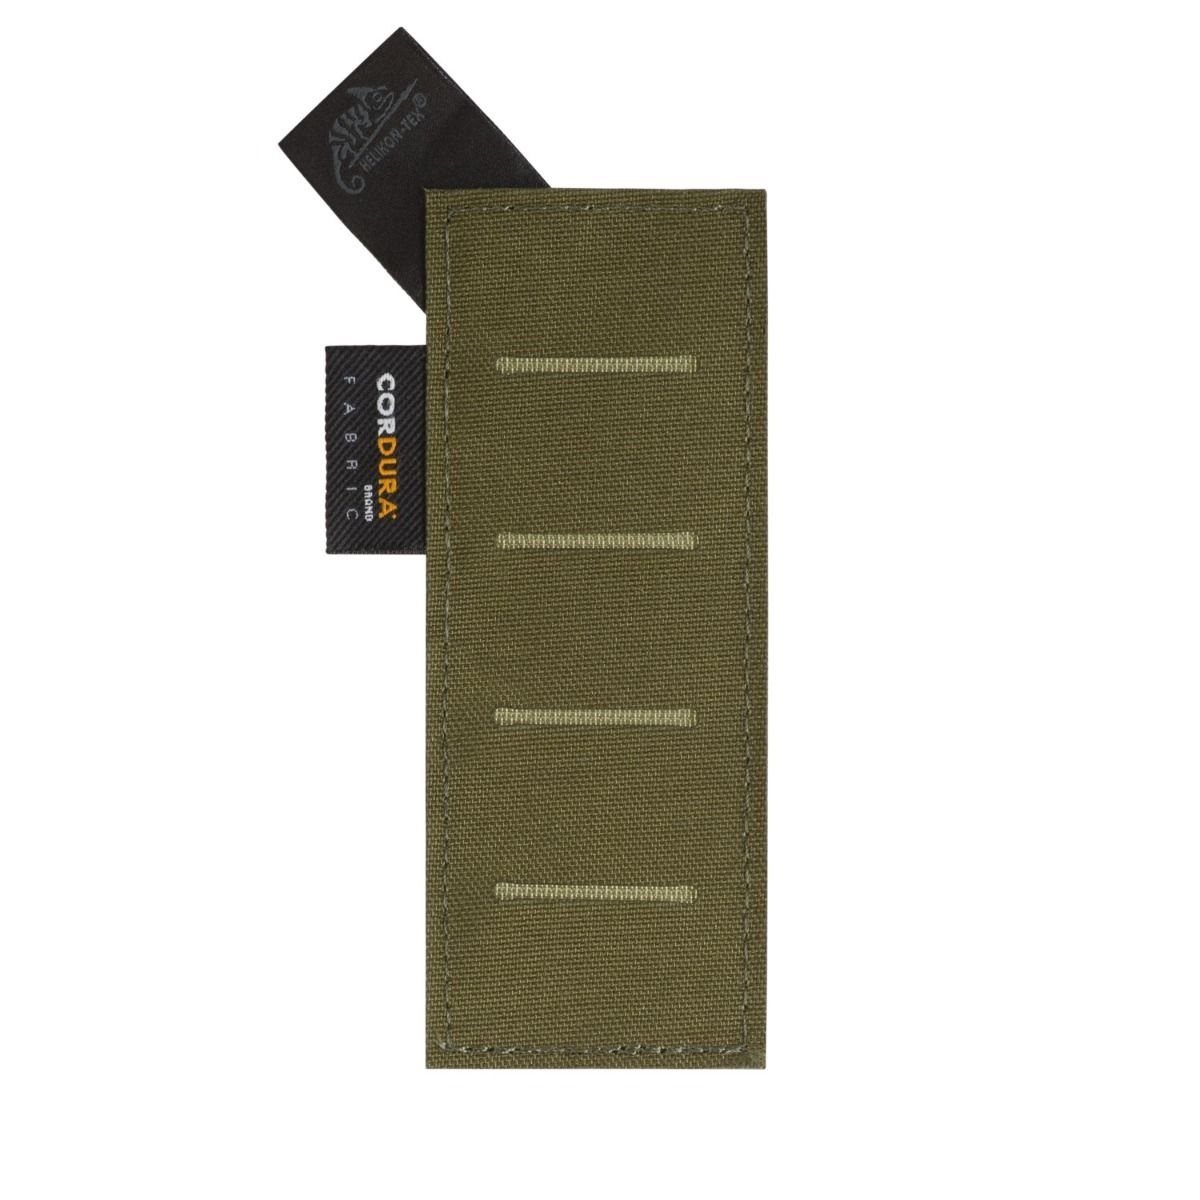 Helikon-Tex Molle Adapter Insert 1 Olive Green 